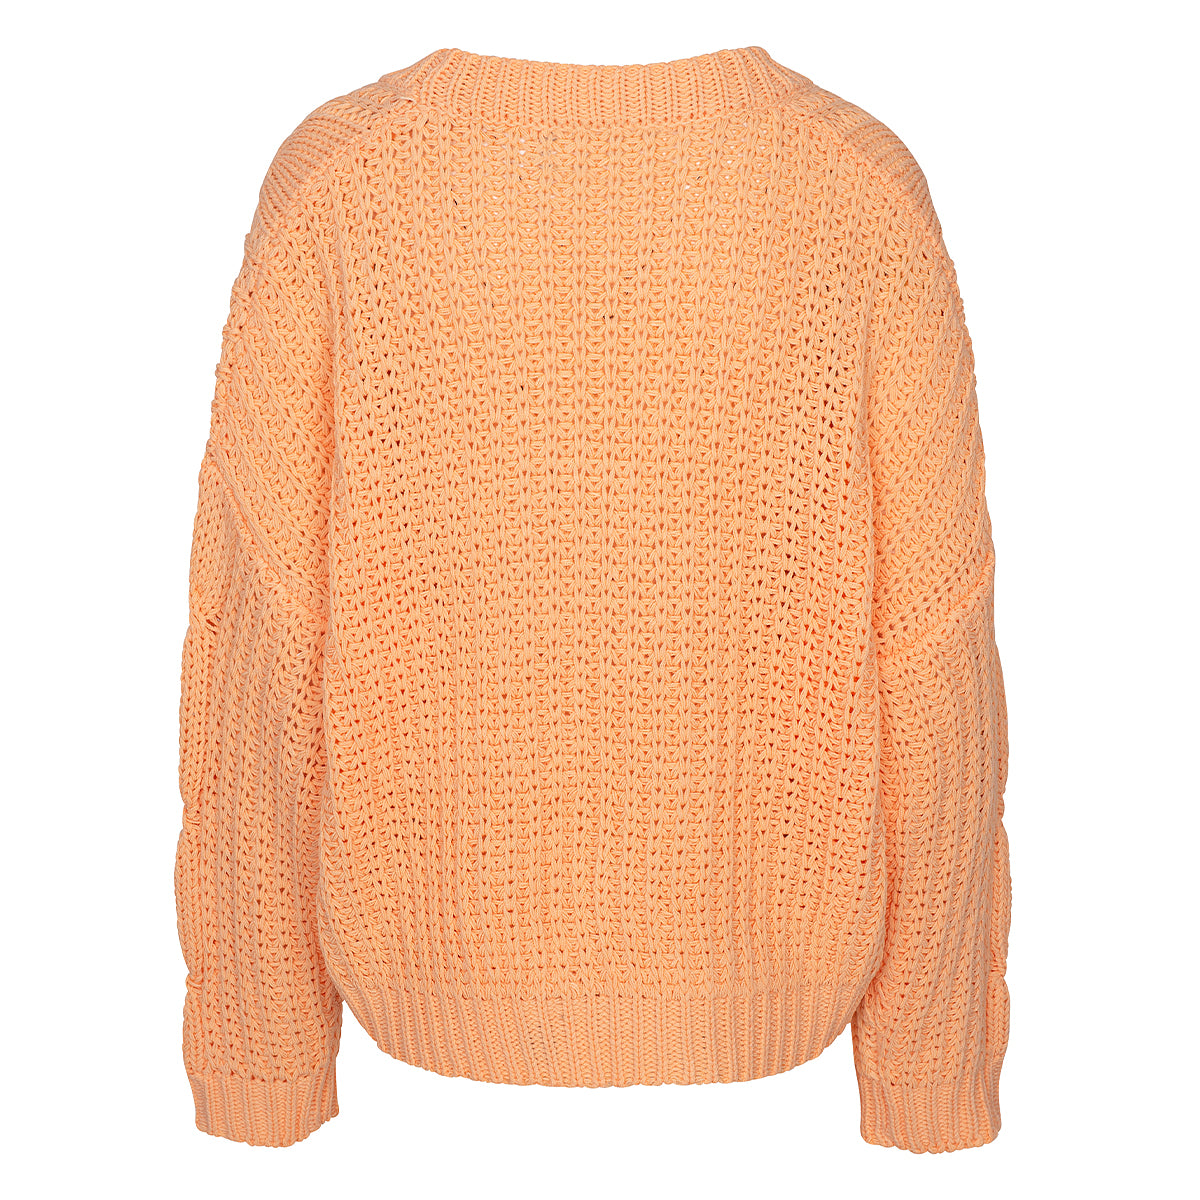 LUXZUZ // ONE TWO Signi Knit Knit 208 Apricot Wash